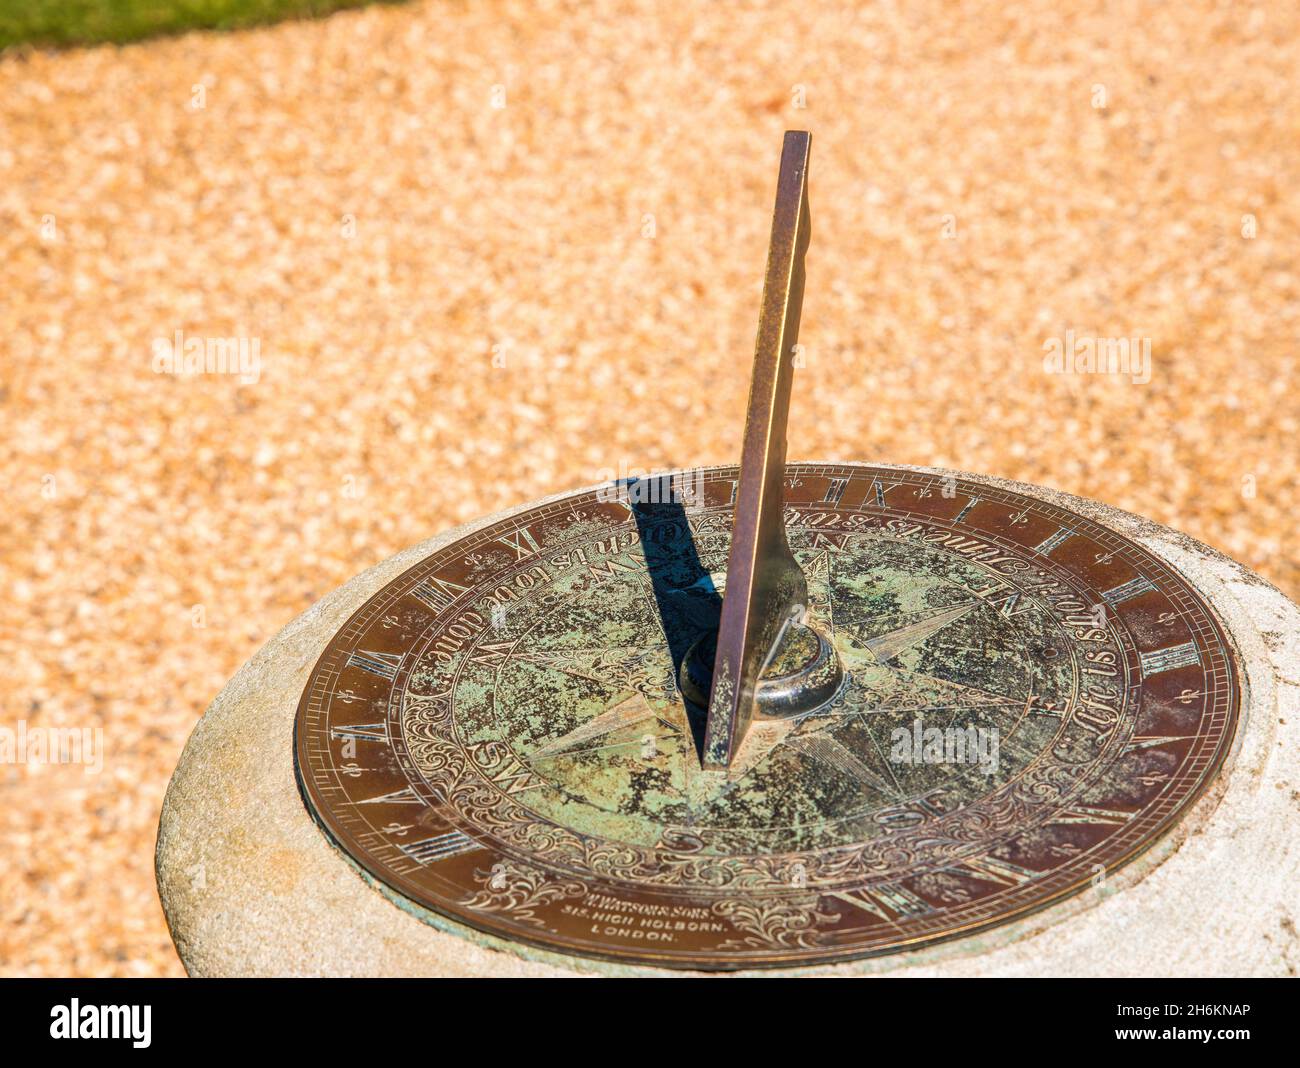 Old Watson and sons engraved brass sundial with compass showing time and direction with the suns shadow Stock Photo